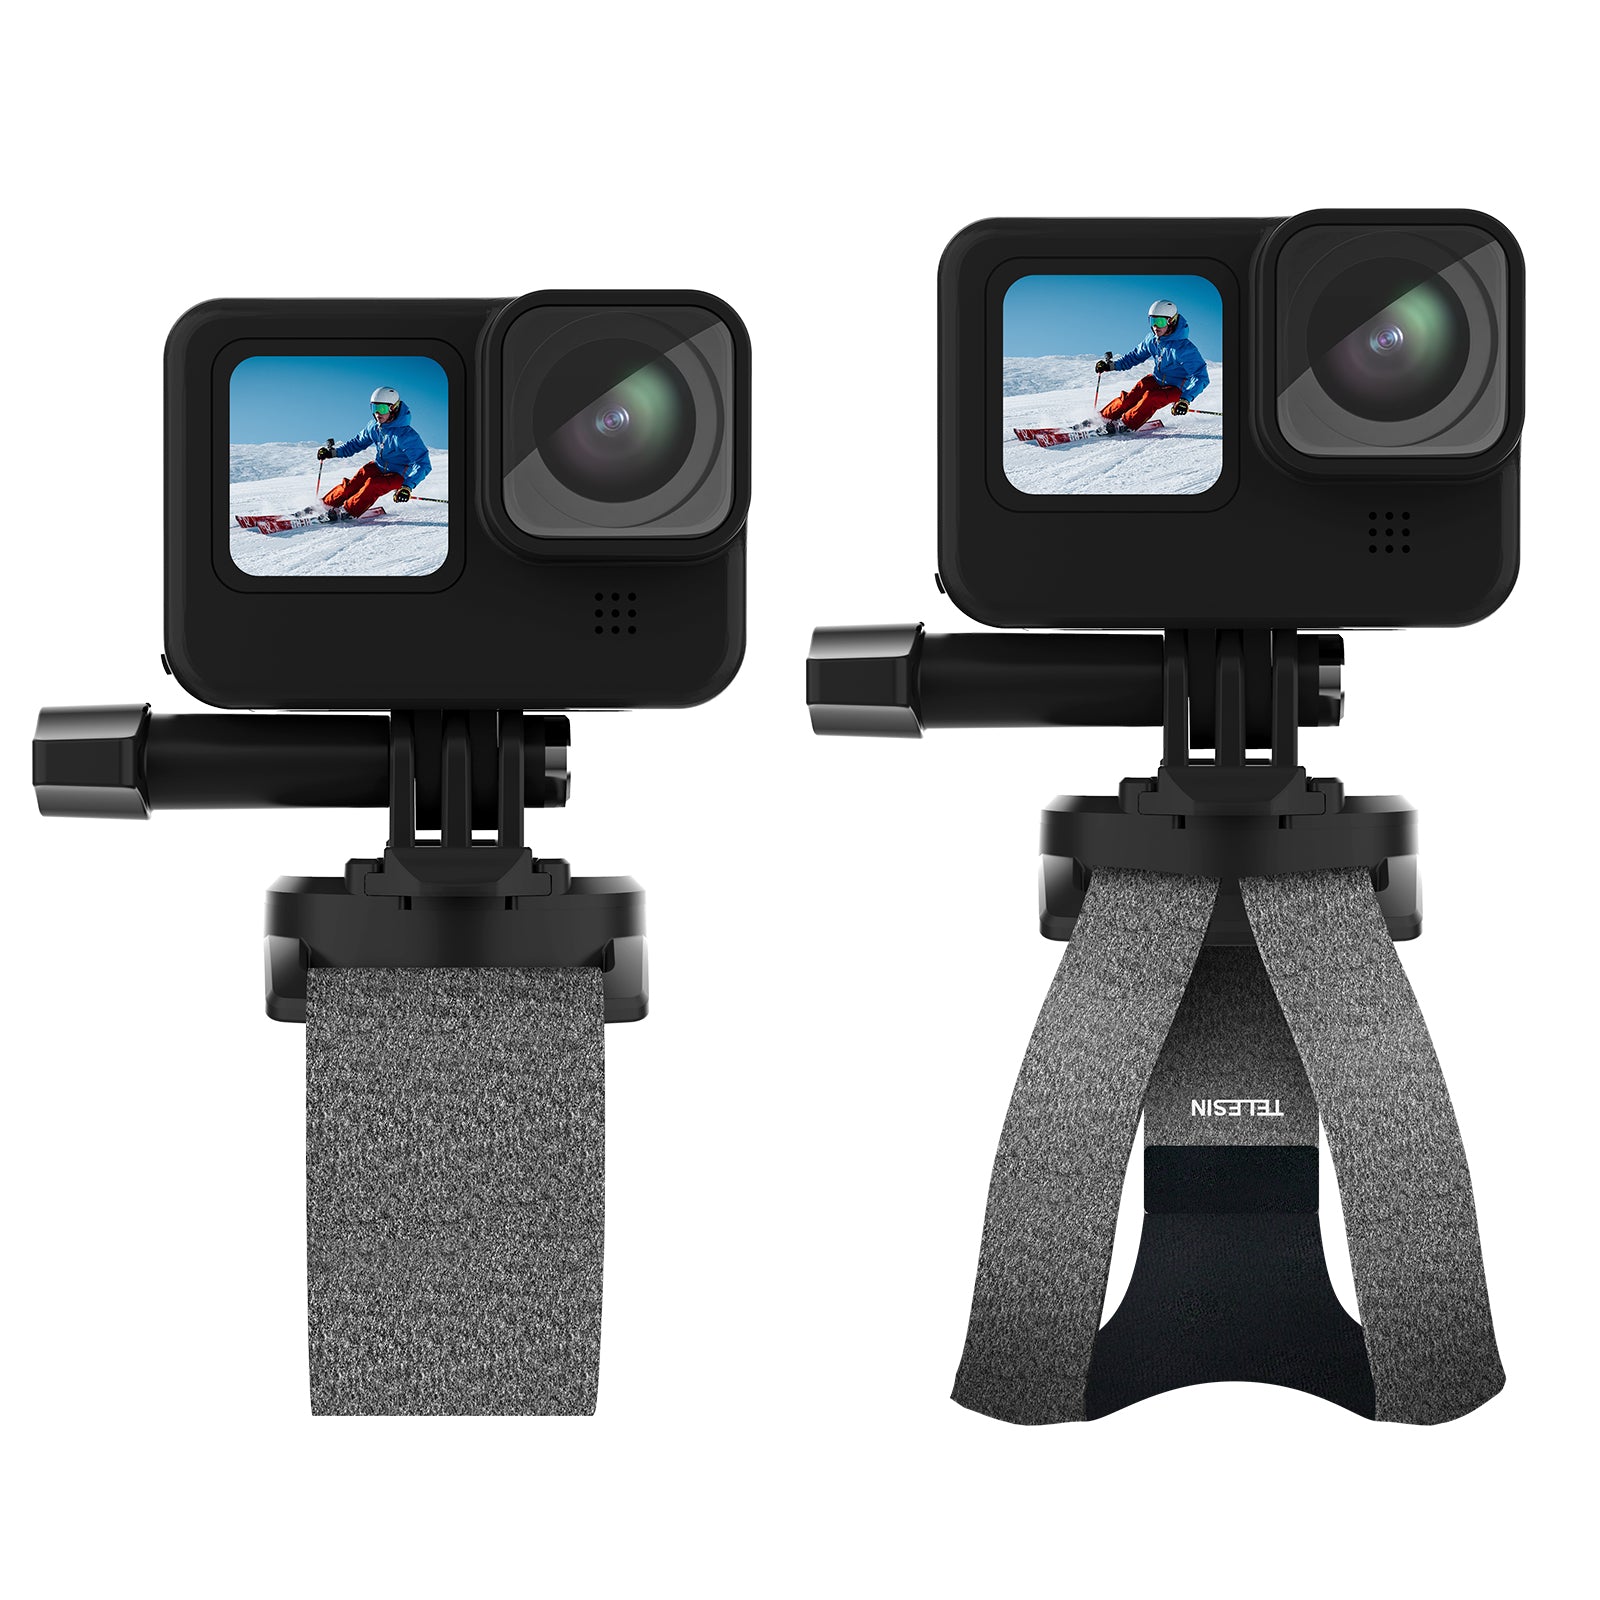 TELESIN 360 Degree Steerable Wrist Strap for Action Camera 